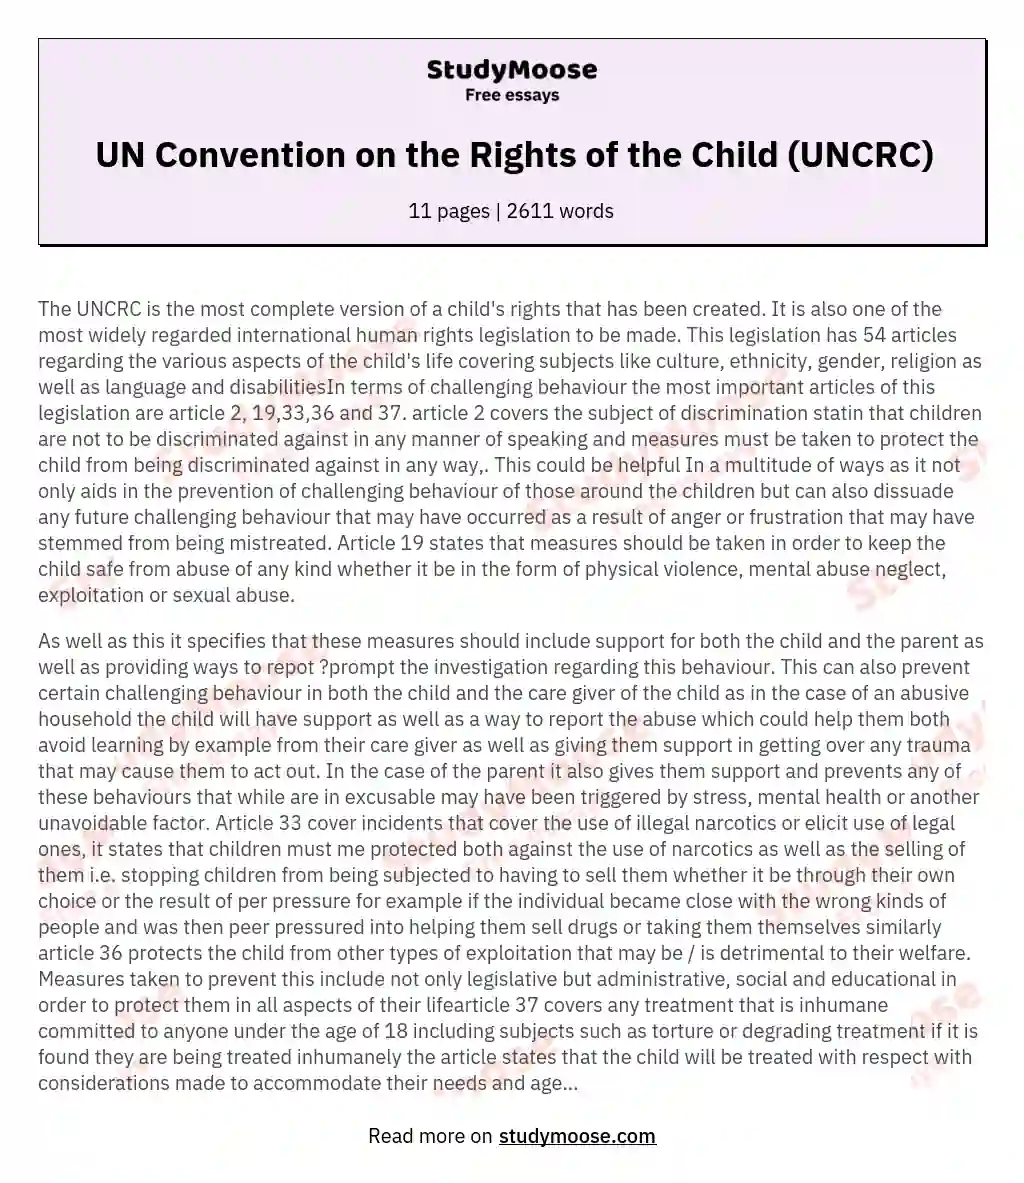 UN Convention on the Rights of the Child (UNCRC) essay